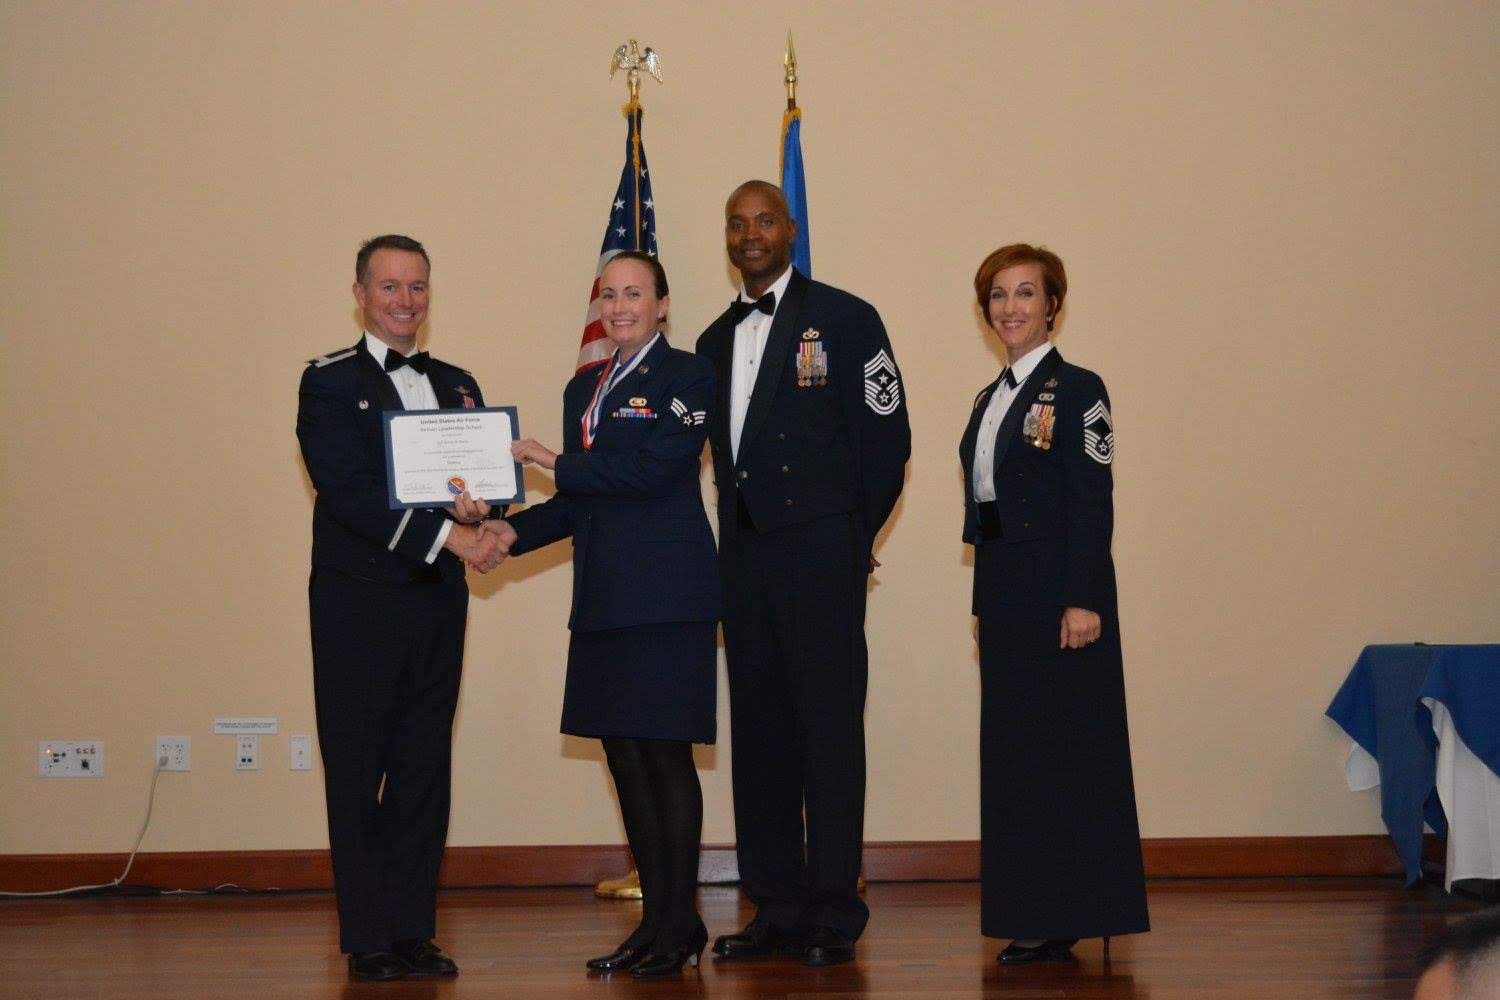 Kelsey Norris in the Air Force receives award with three colleagues